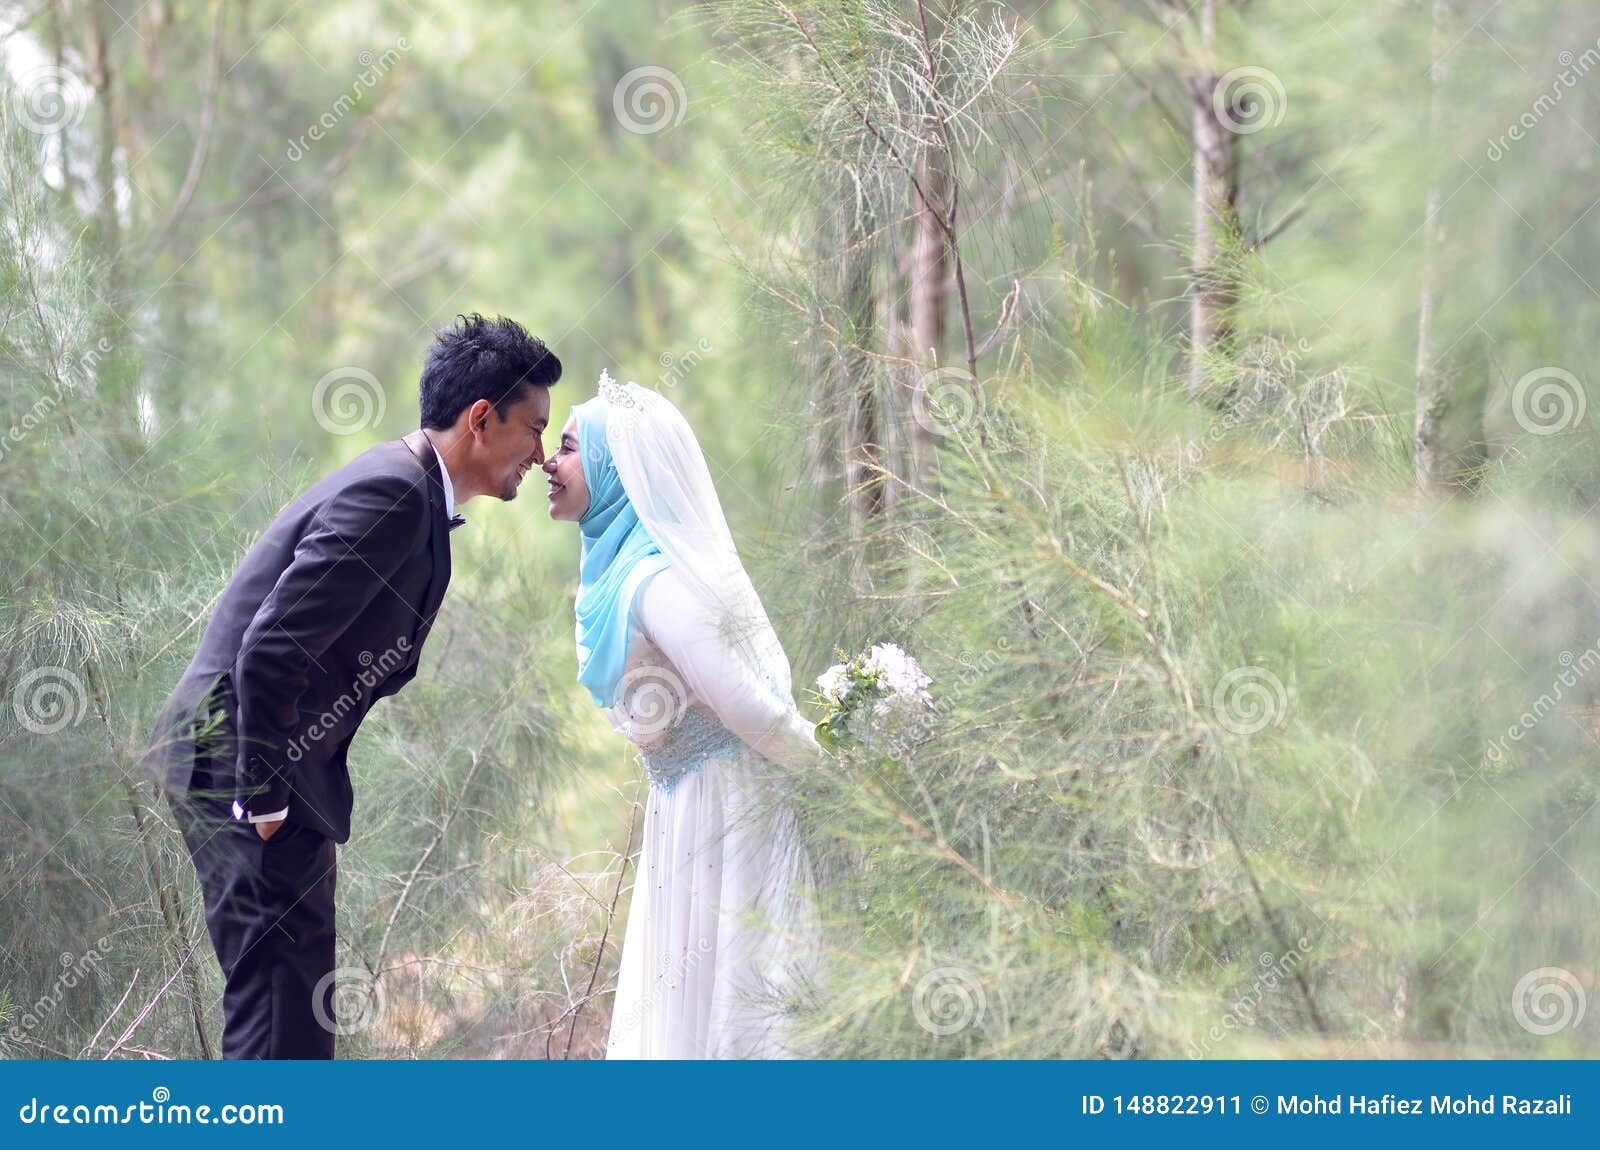 Outdoor Portrait Of A Lovely Malay Wedding Couple In A Beautiful